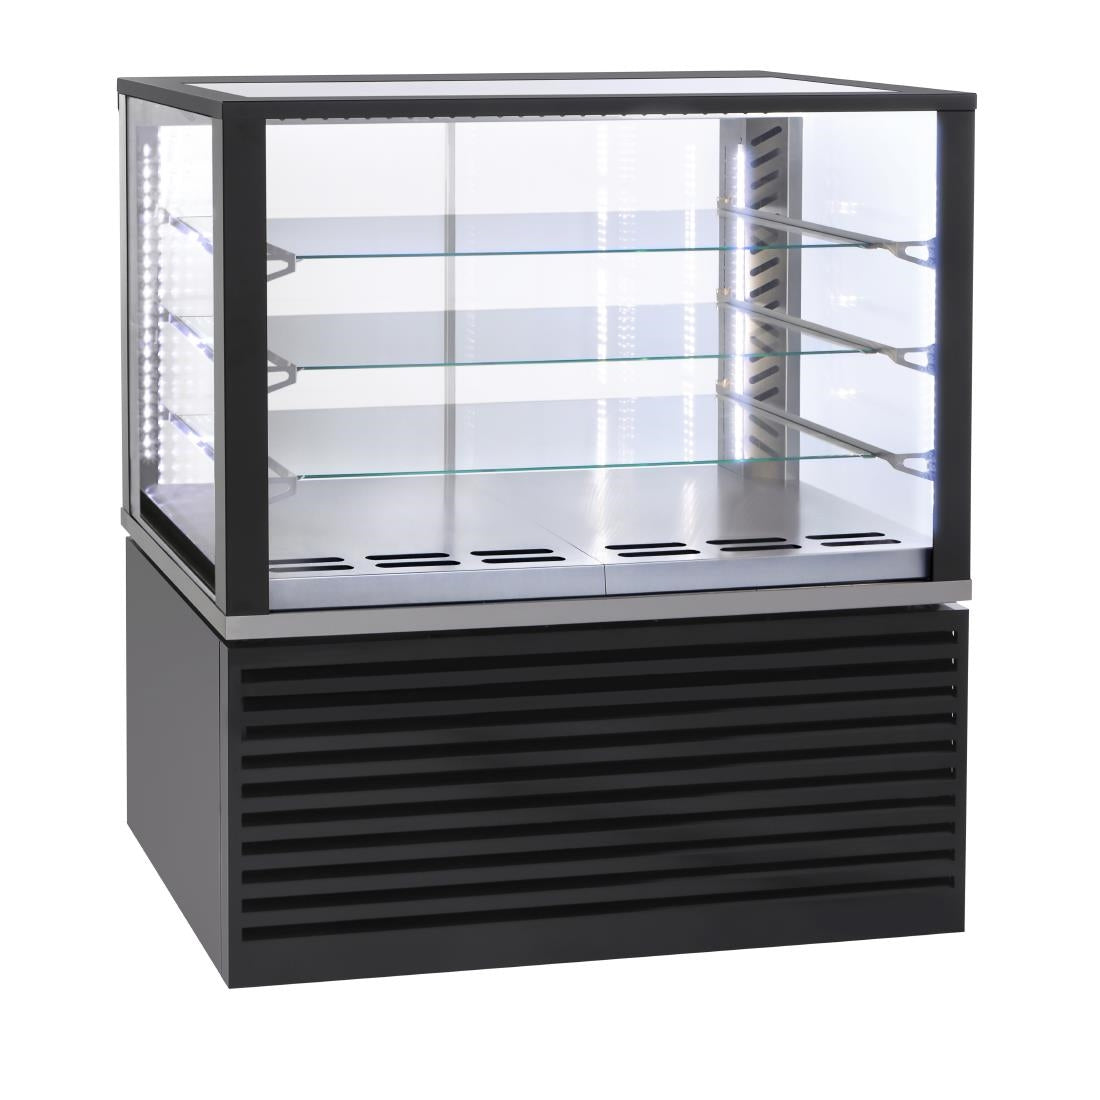 CH130 Roller Grill Panoramic Refrigerated Display Cabinet FSC1200 Black JD Catering Equipment Solutions Ltd